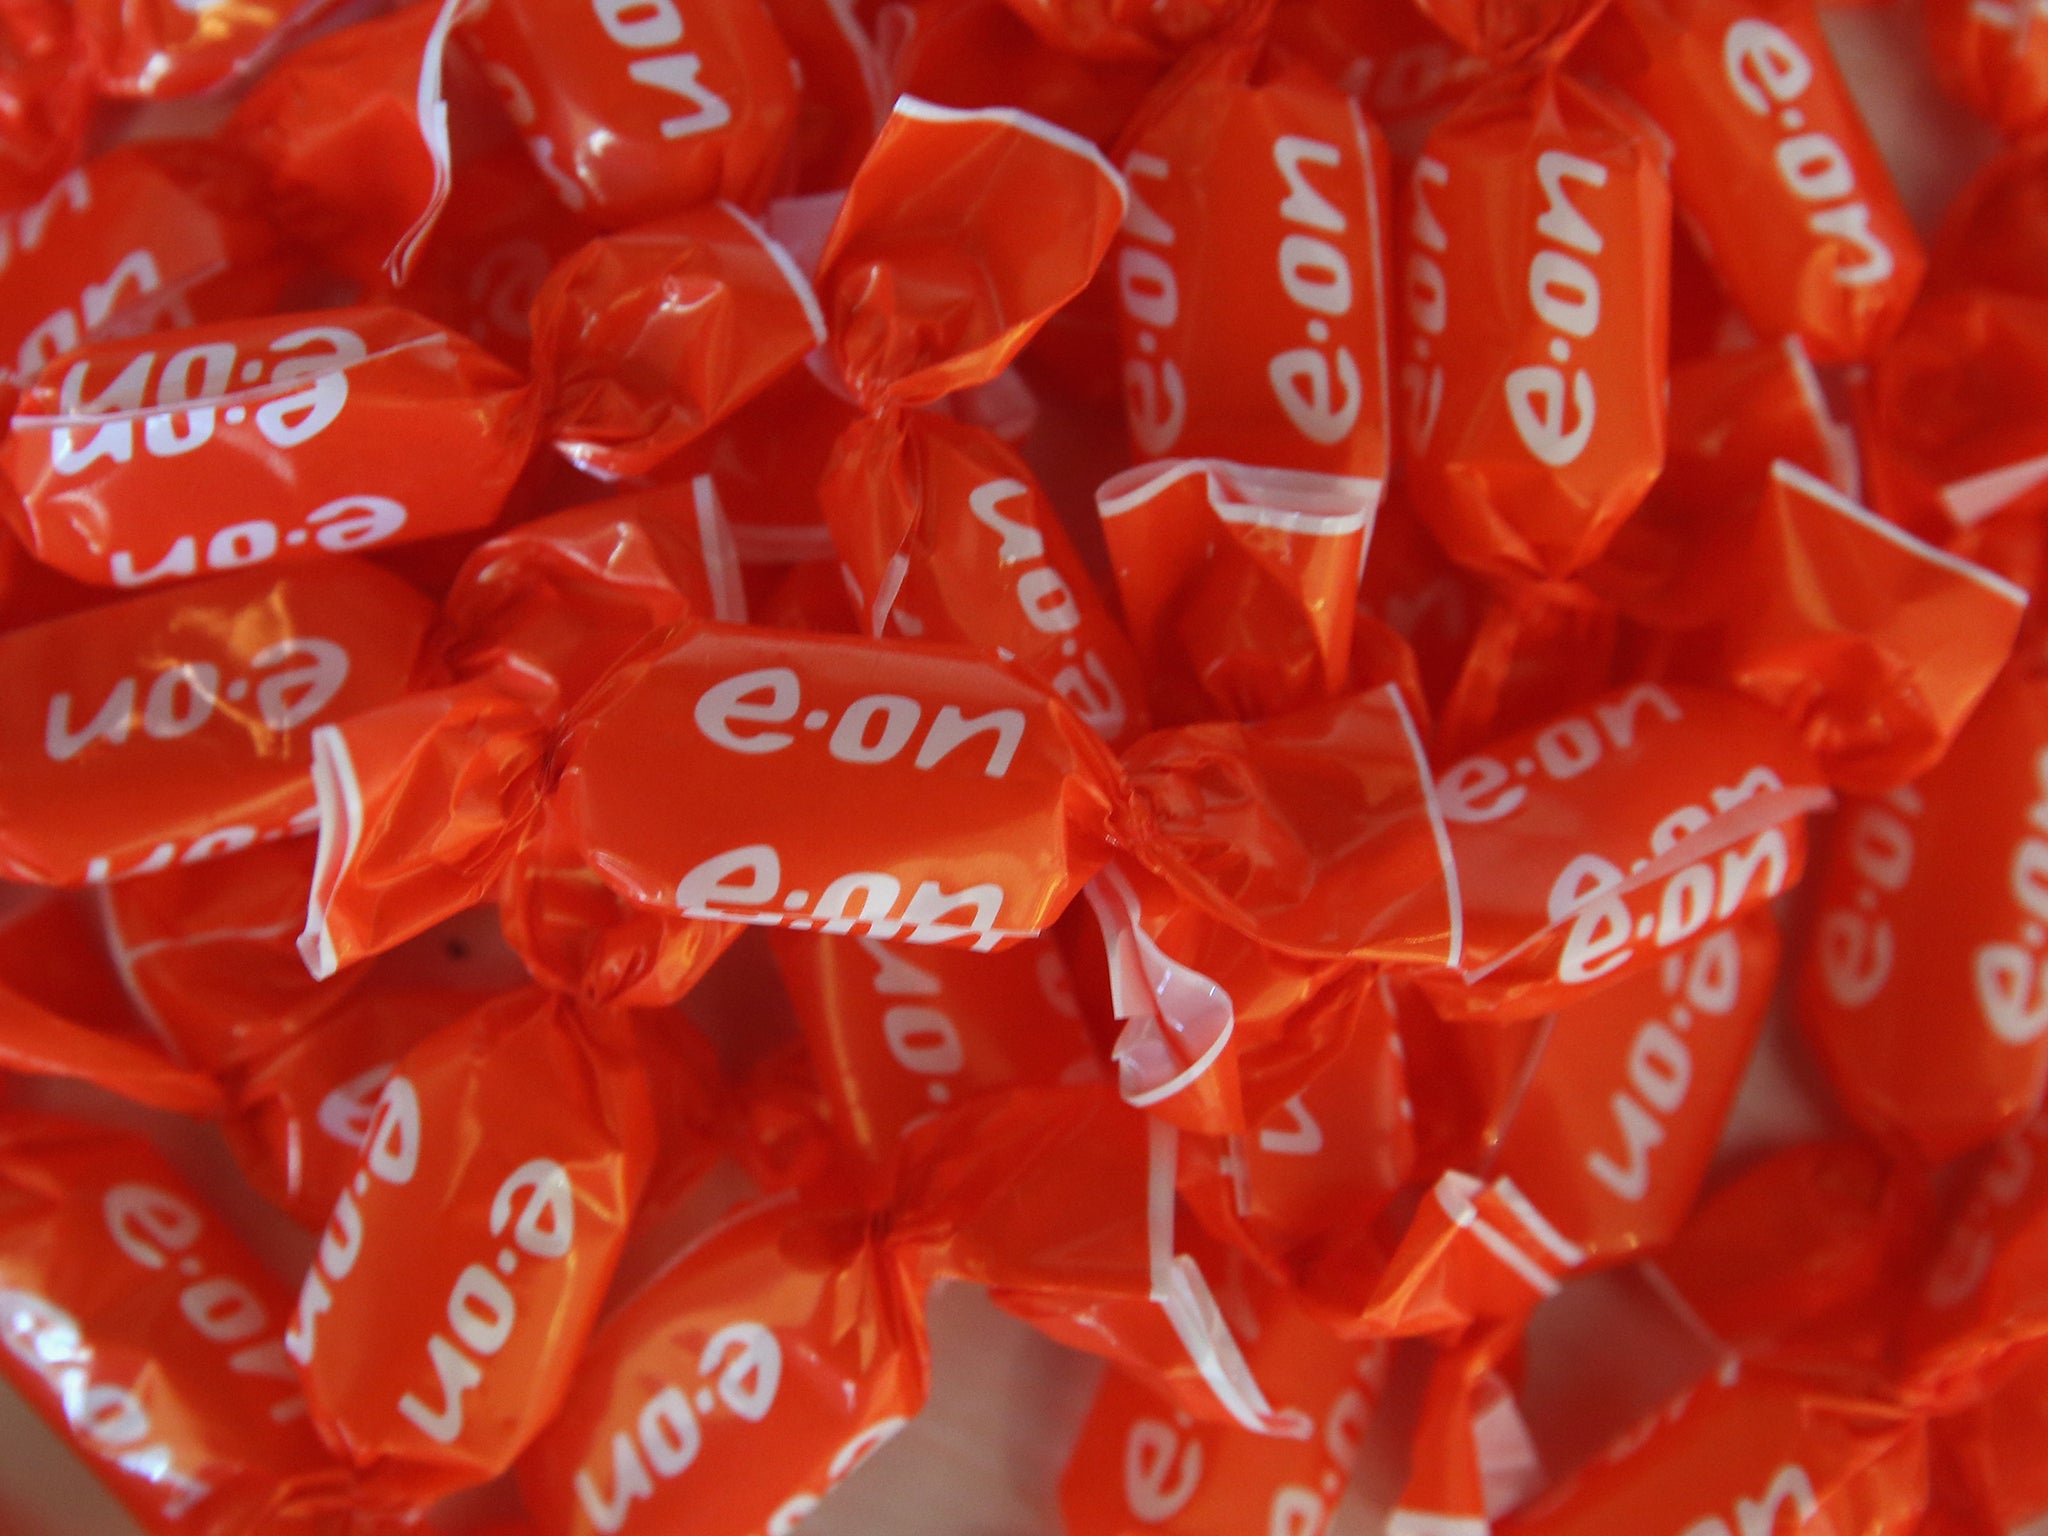 Candy wrapped in the logo of German utility E.ON.